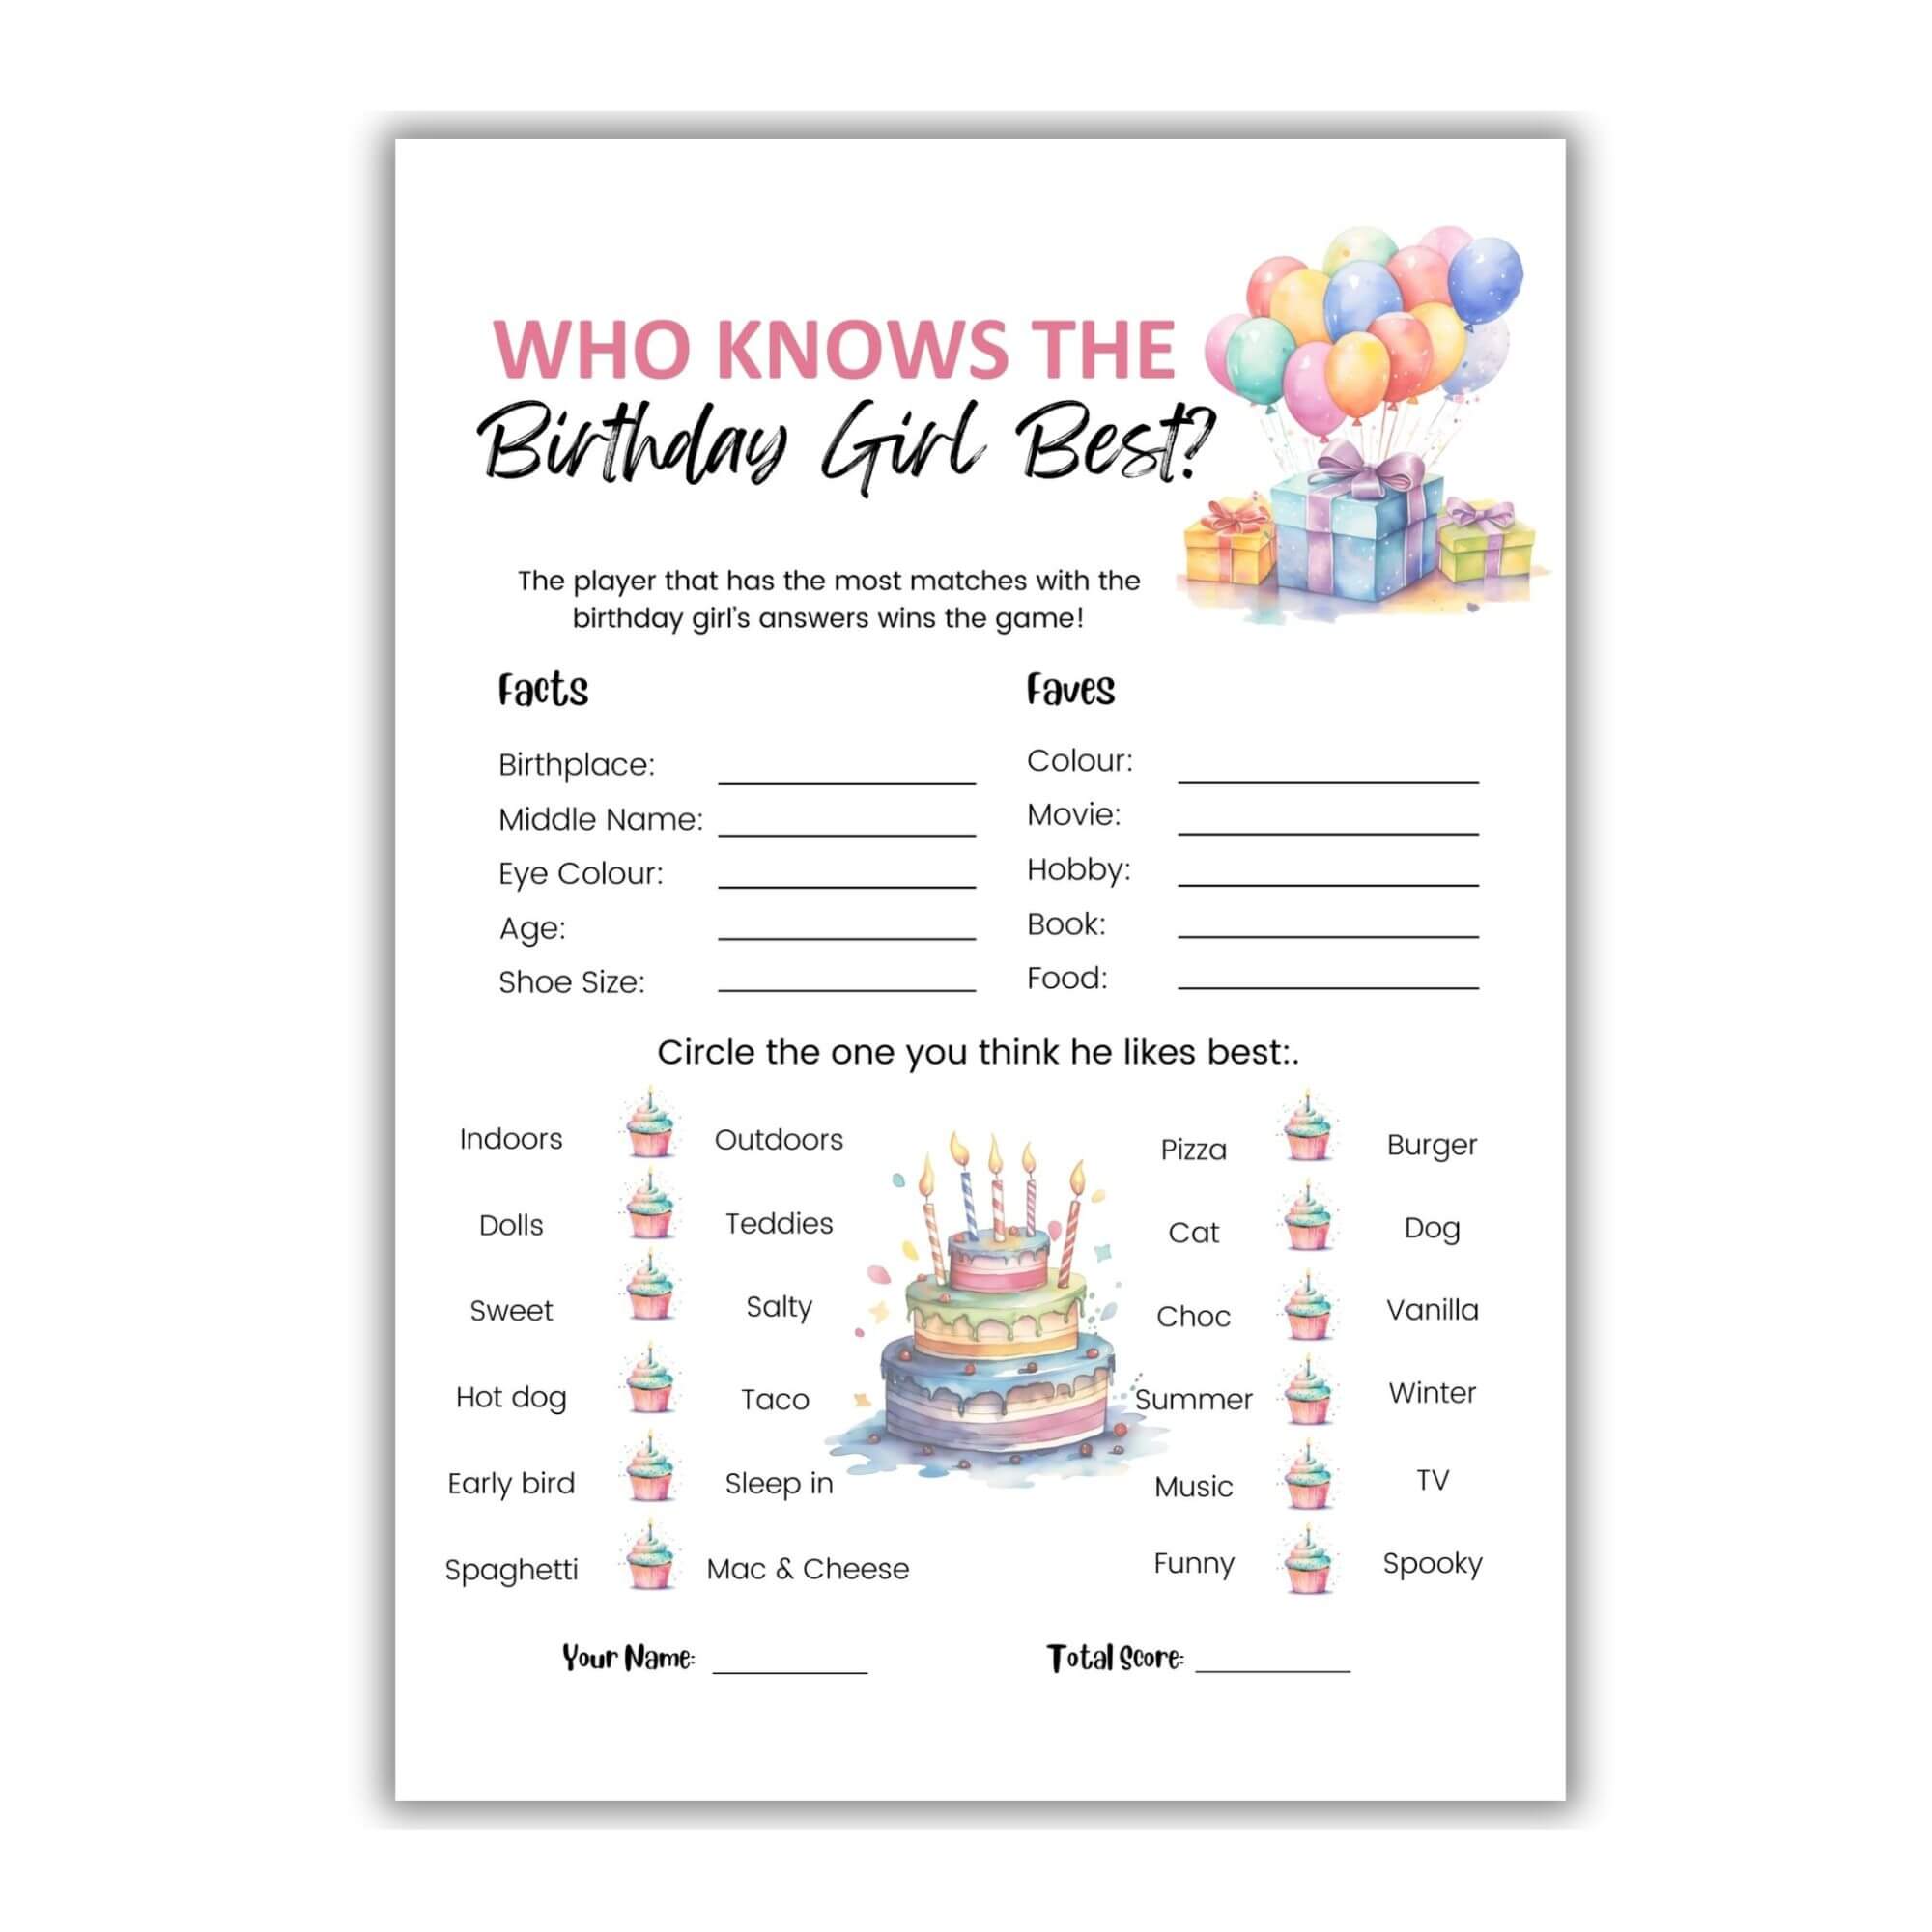 Who knows the birthday girl best printable game.